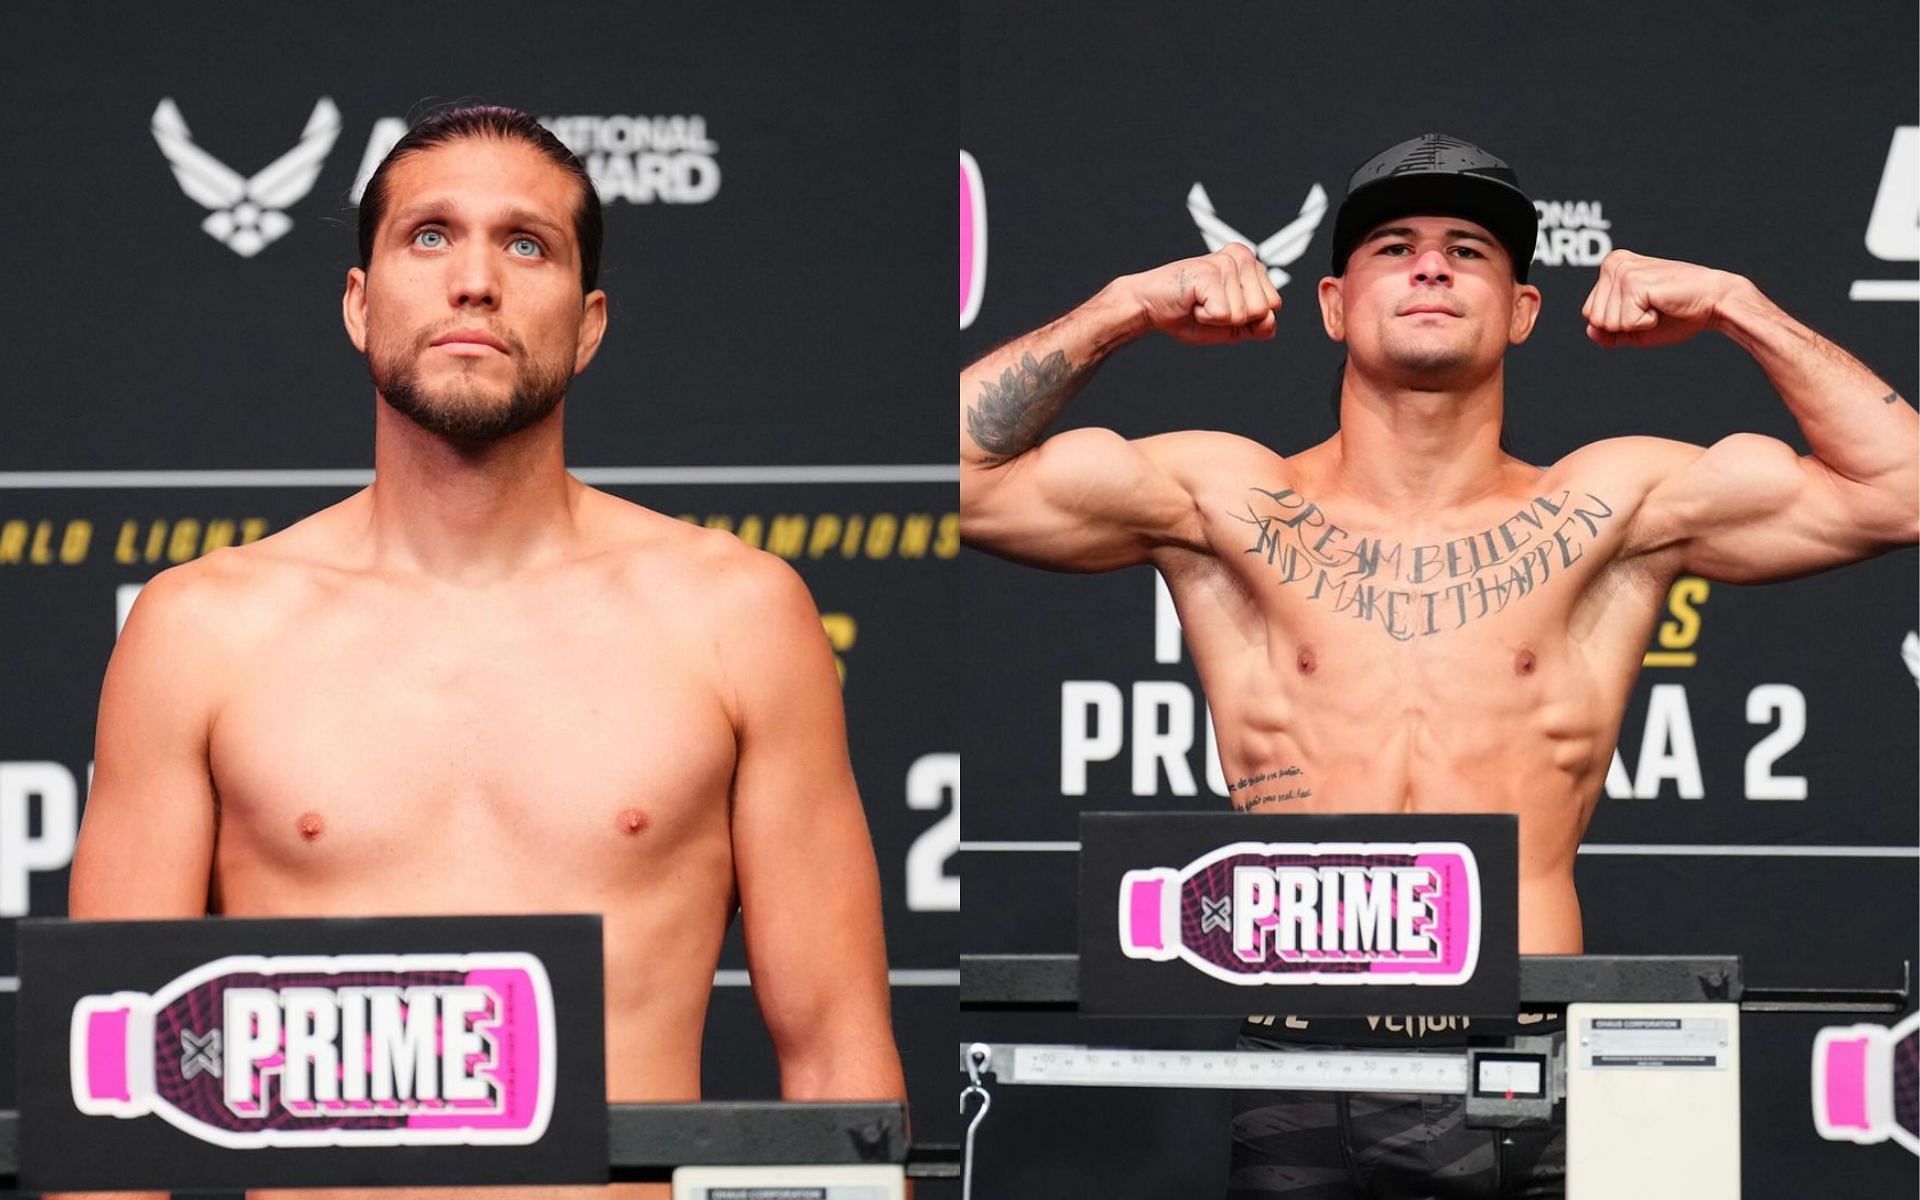 Brian Ortega (left) vs. Diego Lopes (right) will proceed as a lightweight bout. [Images courtesy: @ufc on Instagram]